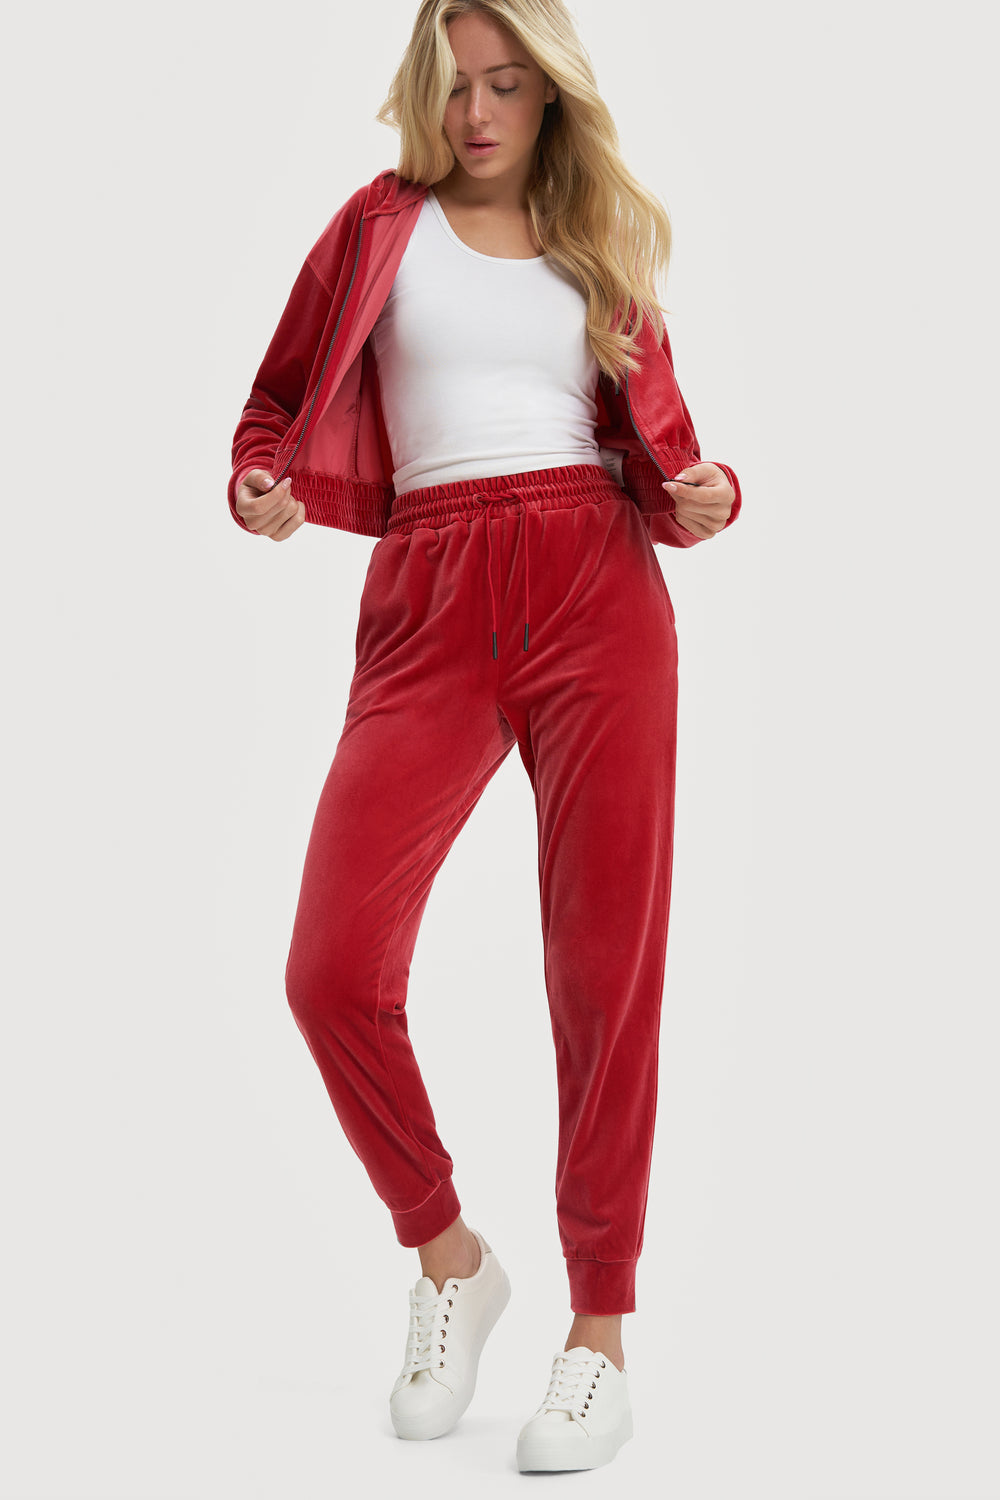 YWDJ Joggers for Women High Waist Dressy Men Casual Trousers And Trousers  Plus Velvet Thick Solid Color Large Size Running Fitness Sports Pants Red L  